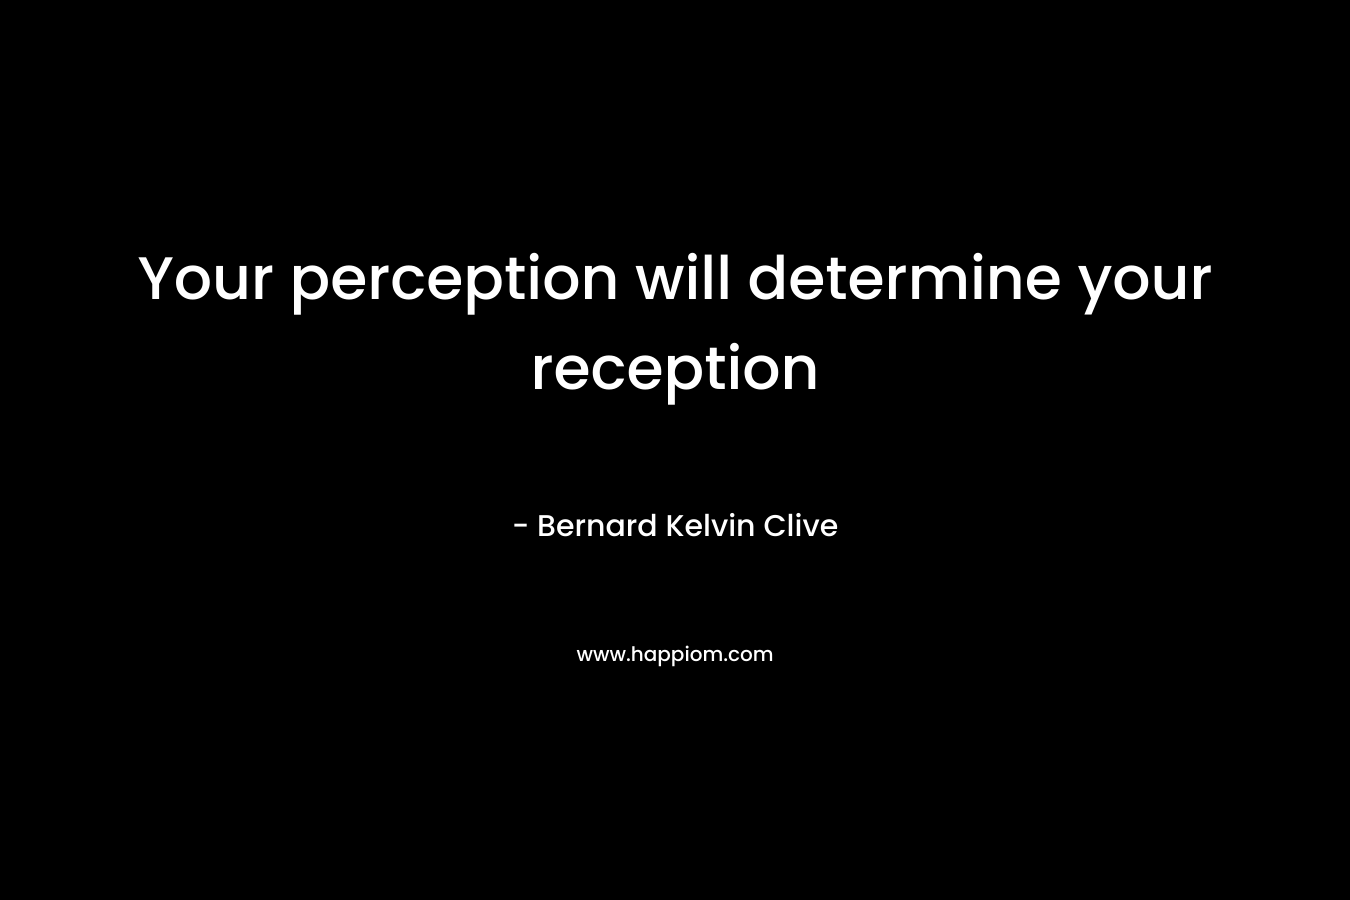 Your perception will determine your reception